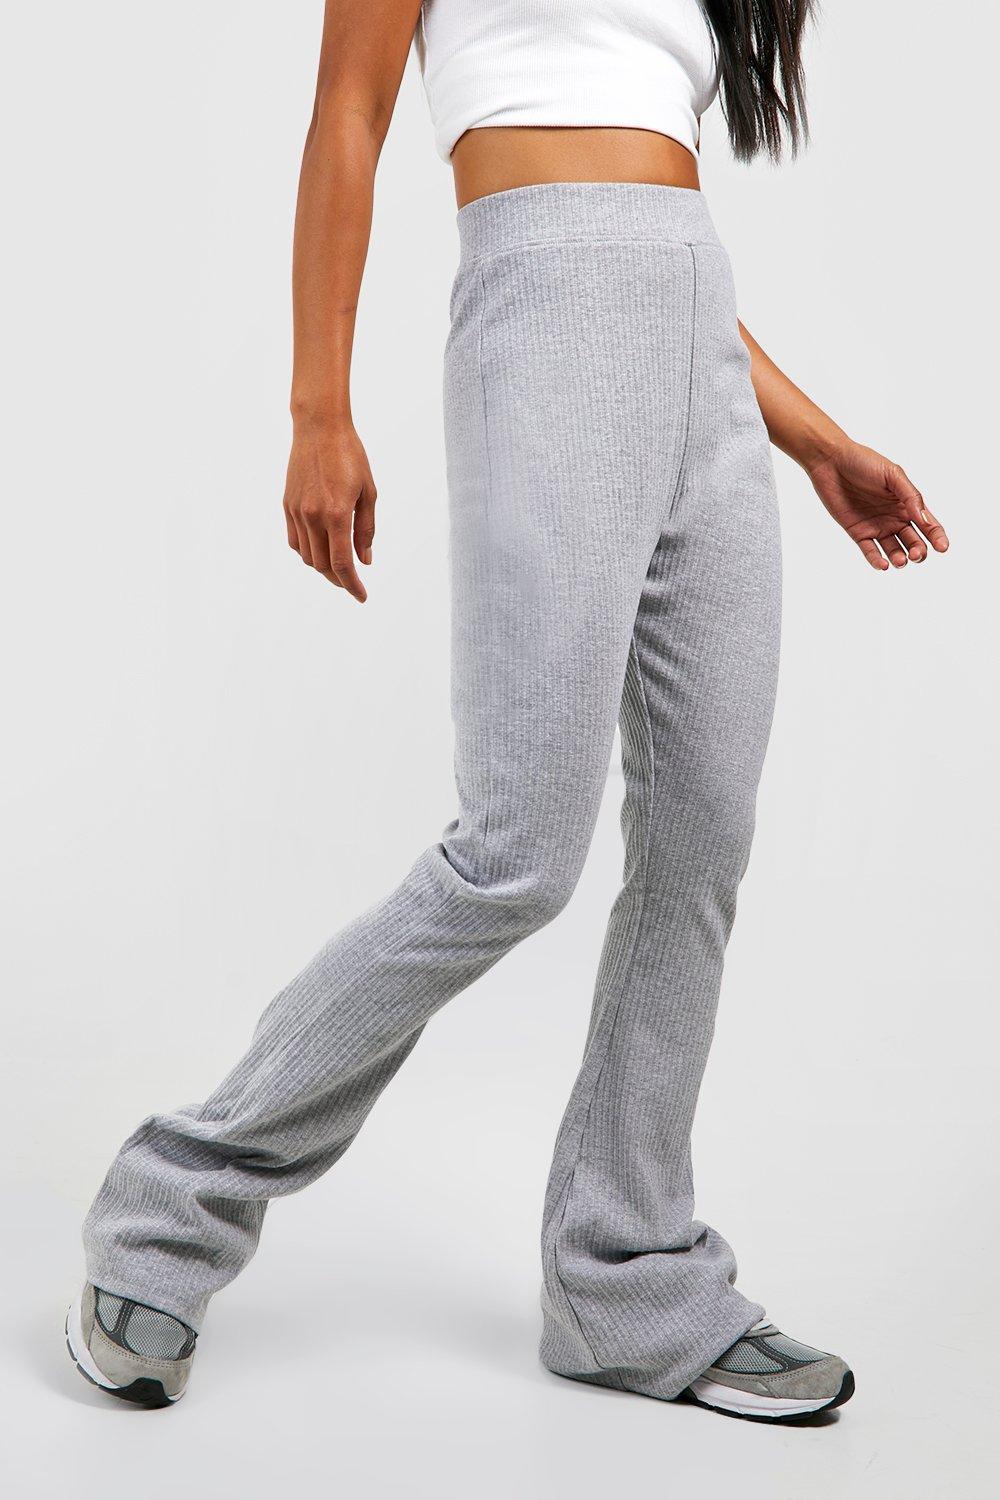 Women's Cozy Ribbed Crossover Waistband Flare Legging Pants - Colsie™  Heathered Gray S